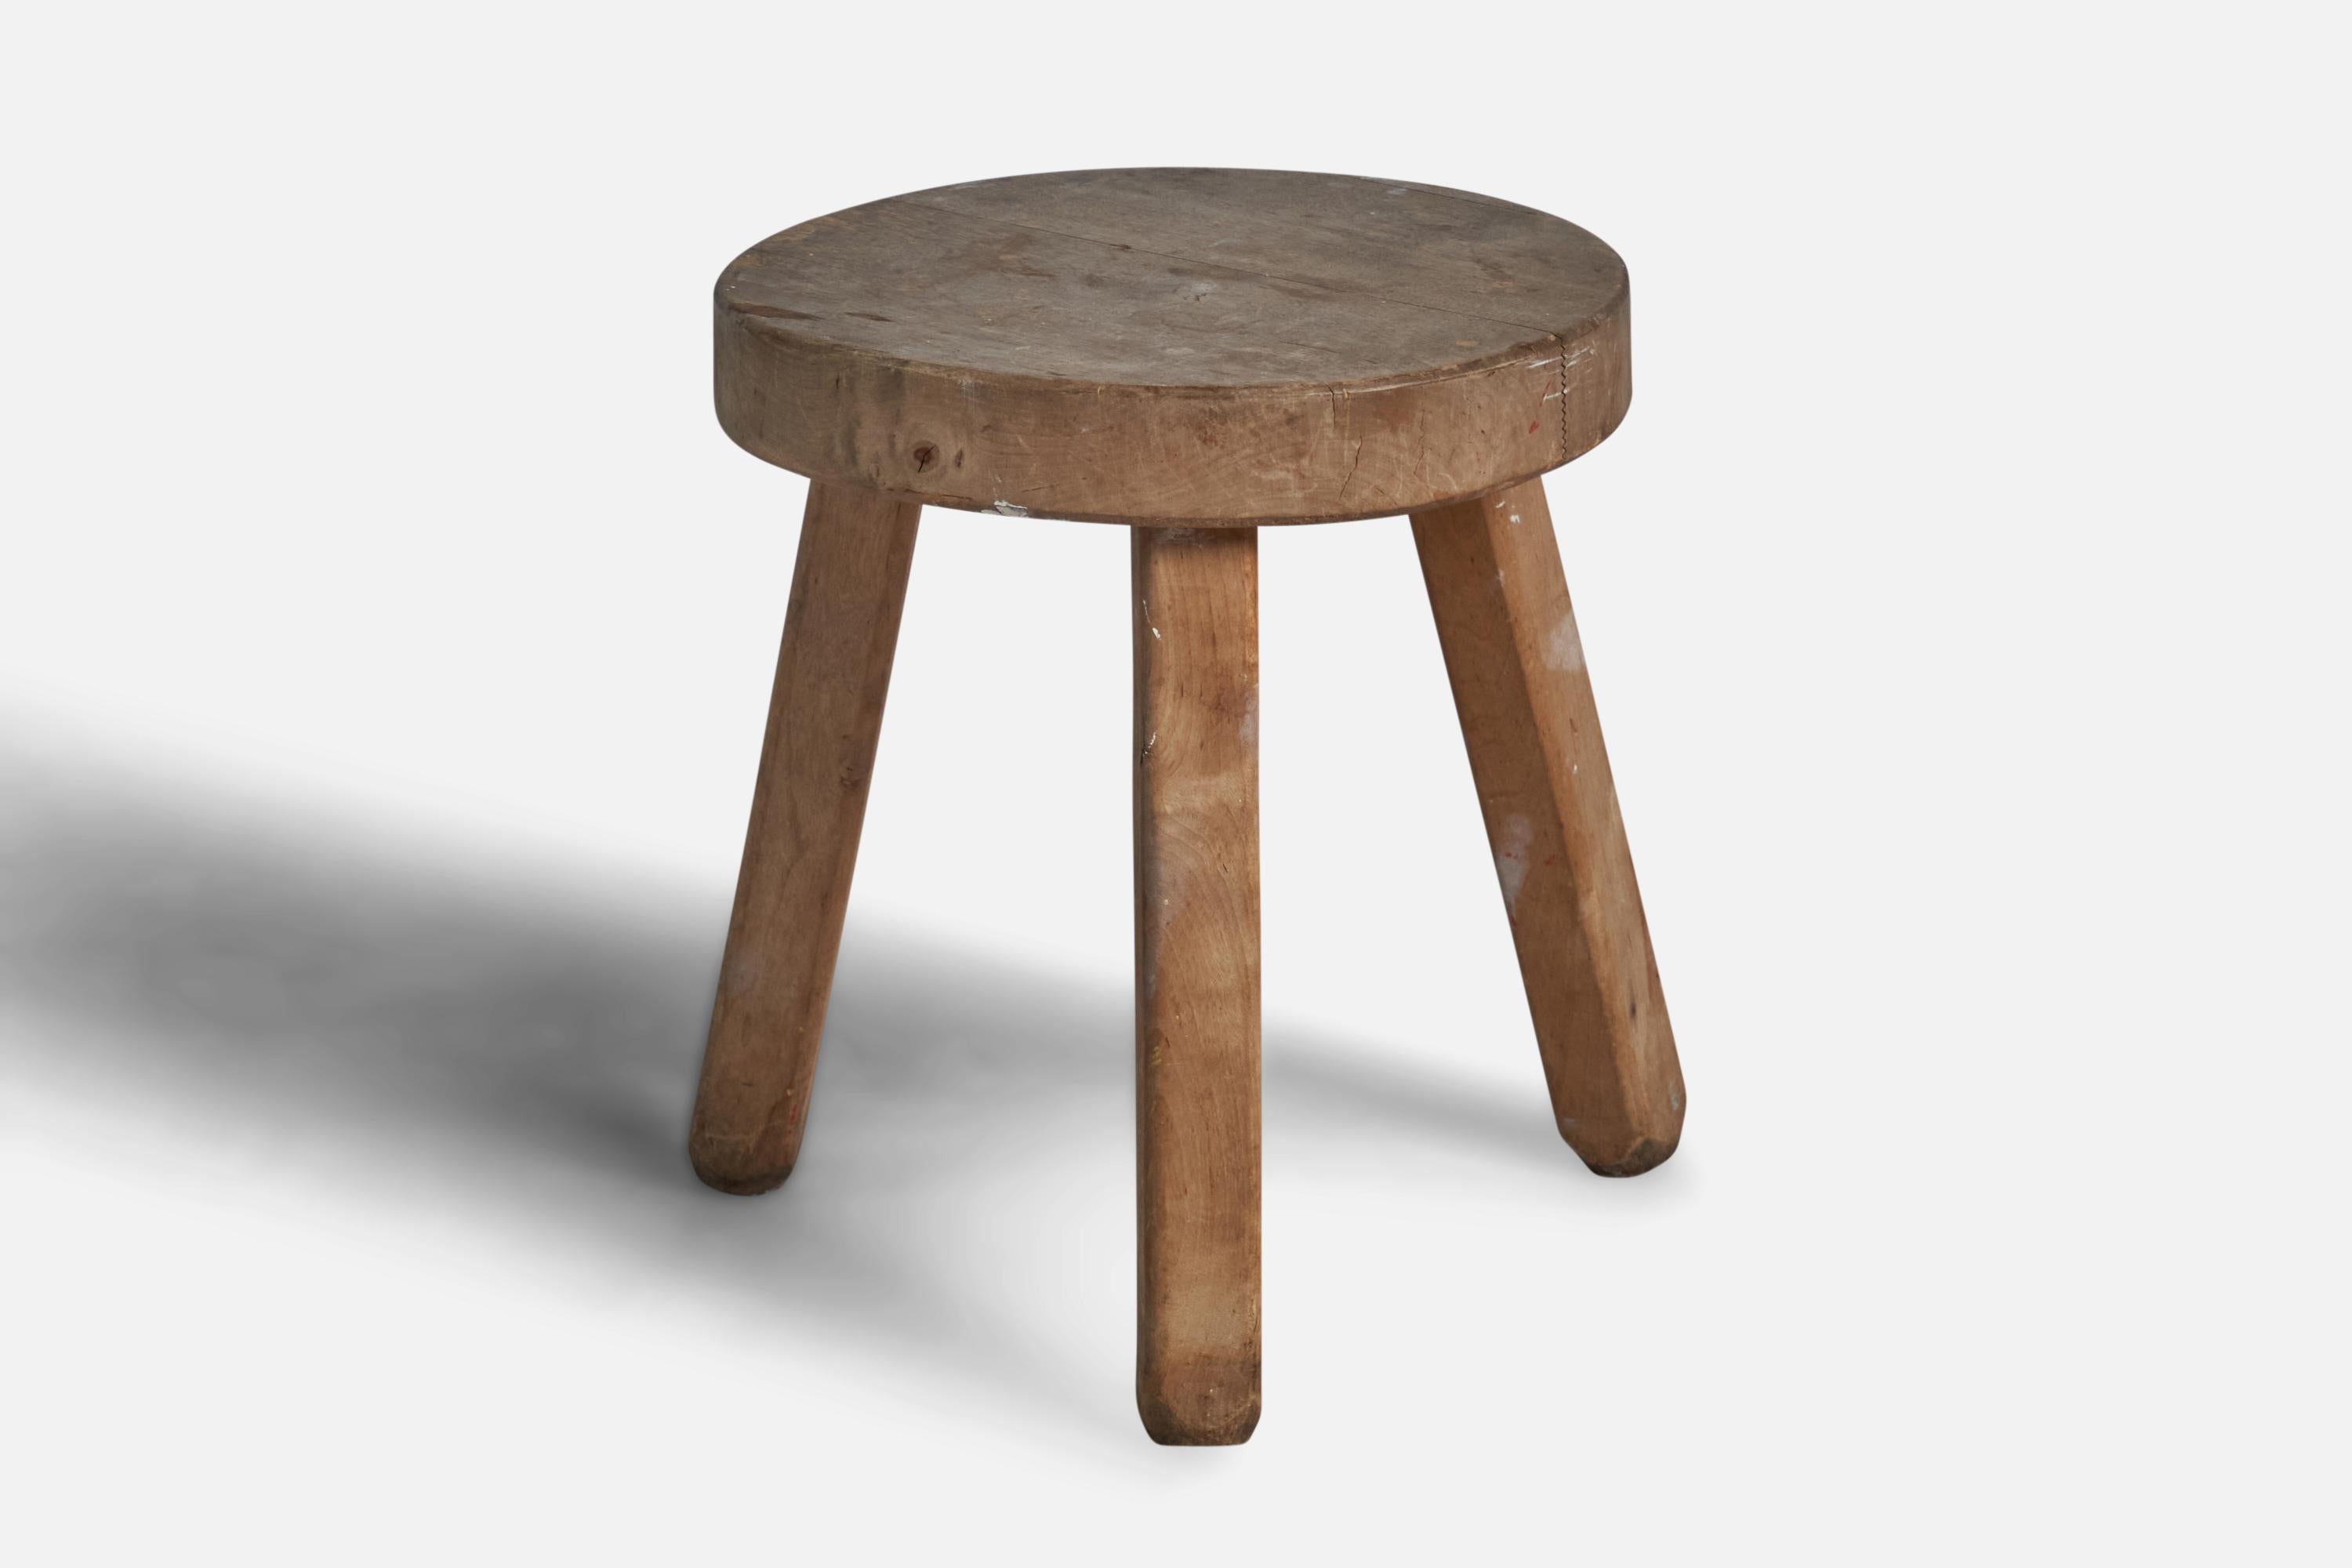 A wood stool designed and produced in Sweden, c. 1930s.